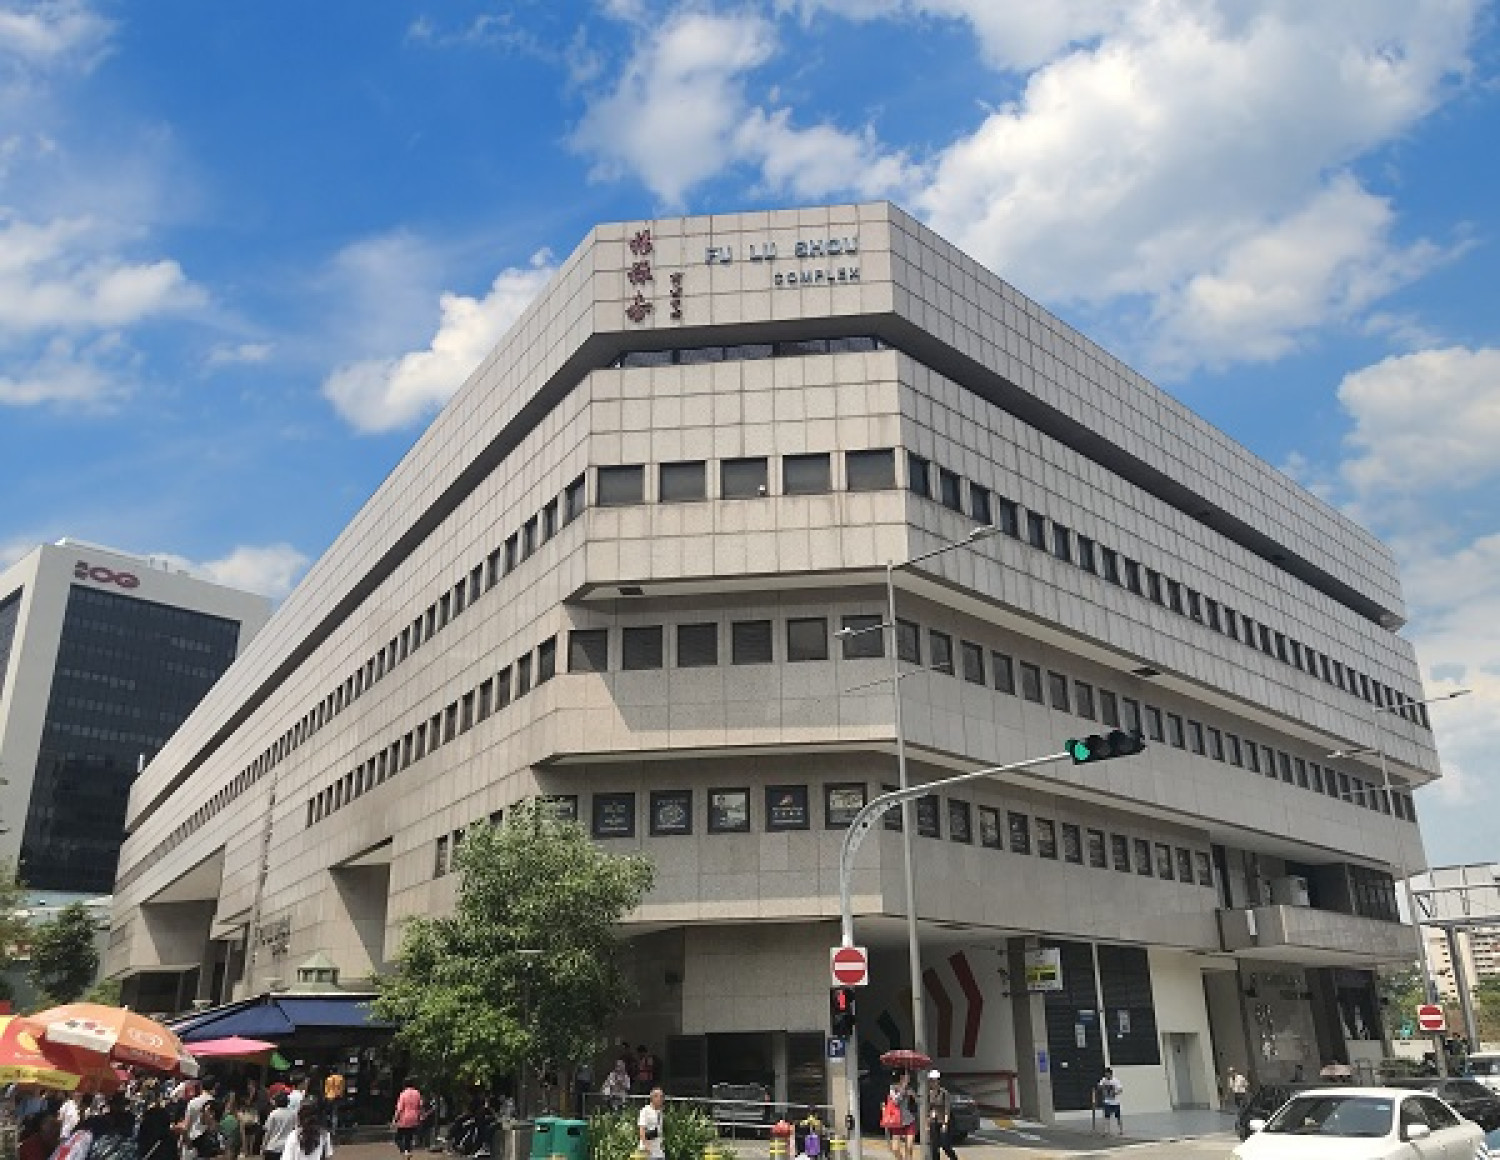 Three strata offices at Fu Lu Shou Complex for sale at $1,400 psf - Property News